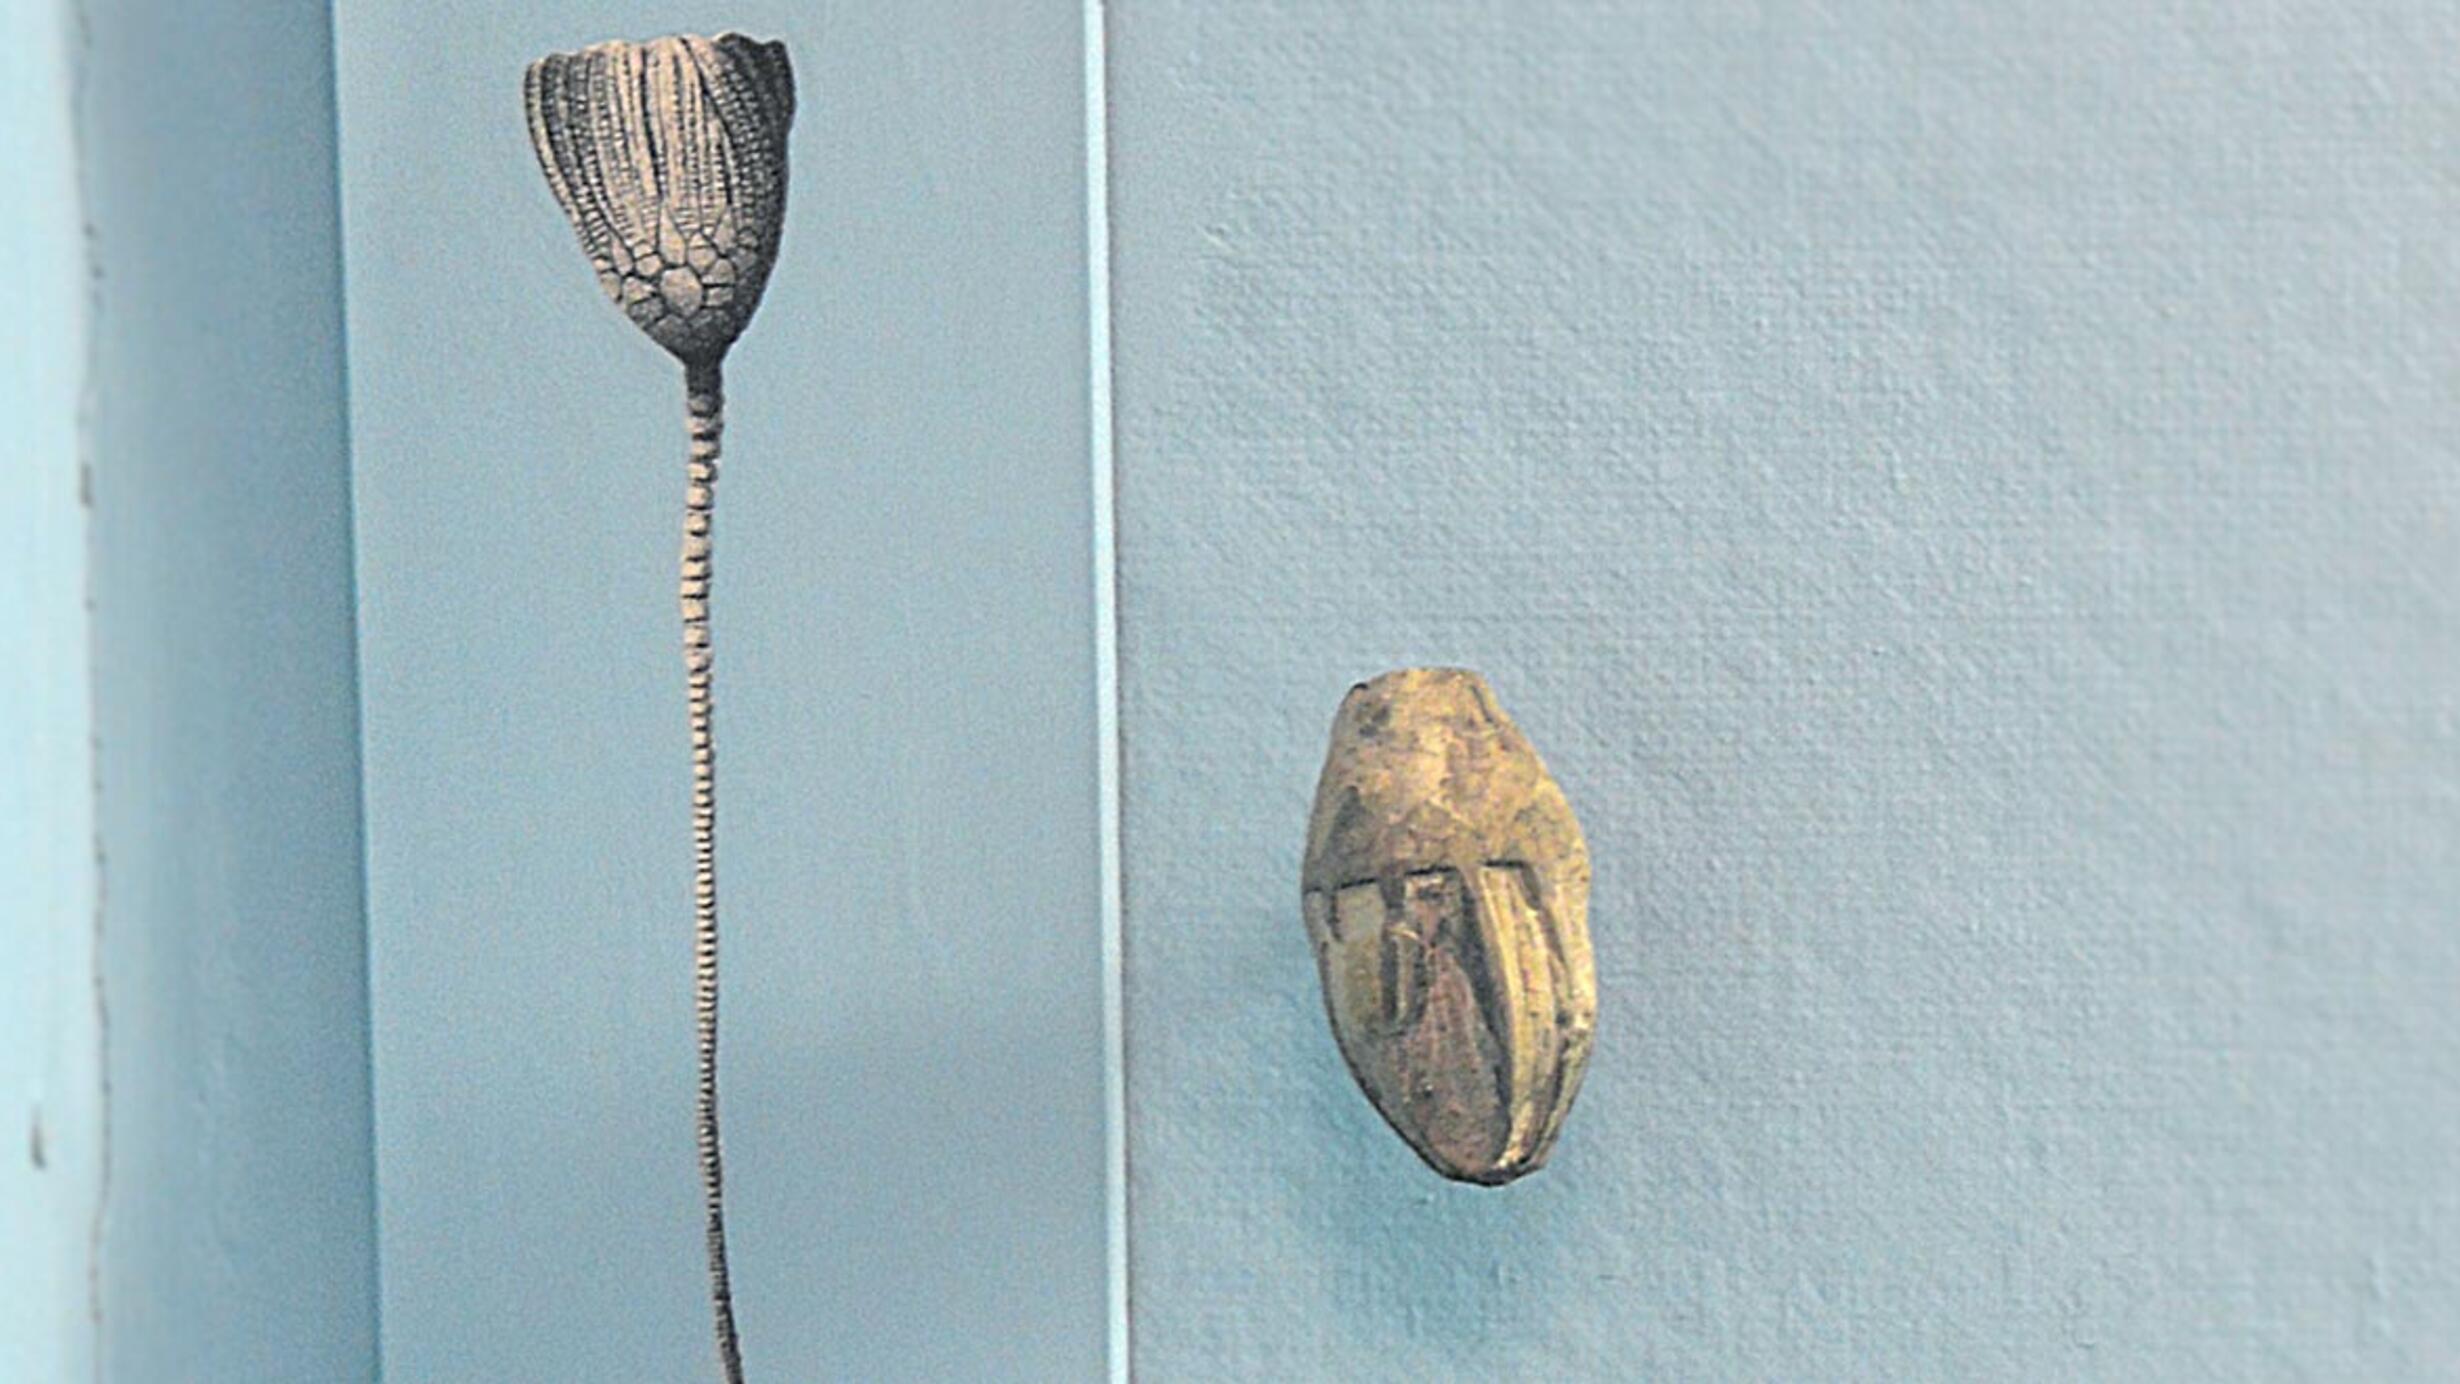 Fossil and illustration of crinoid.